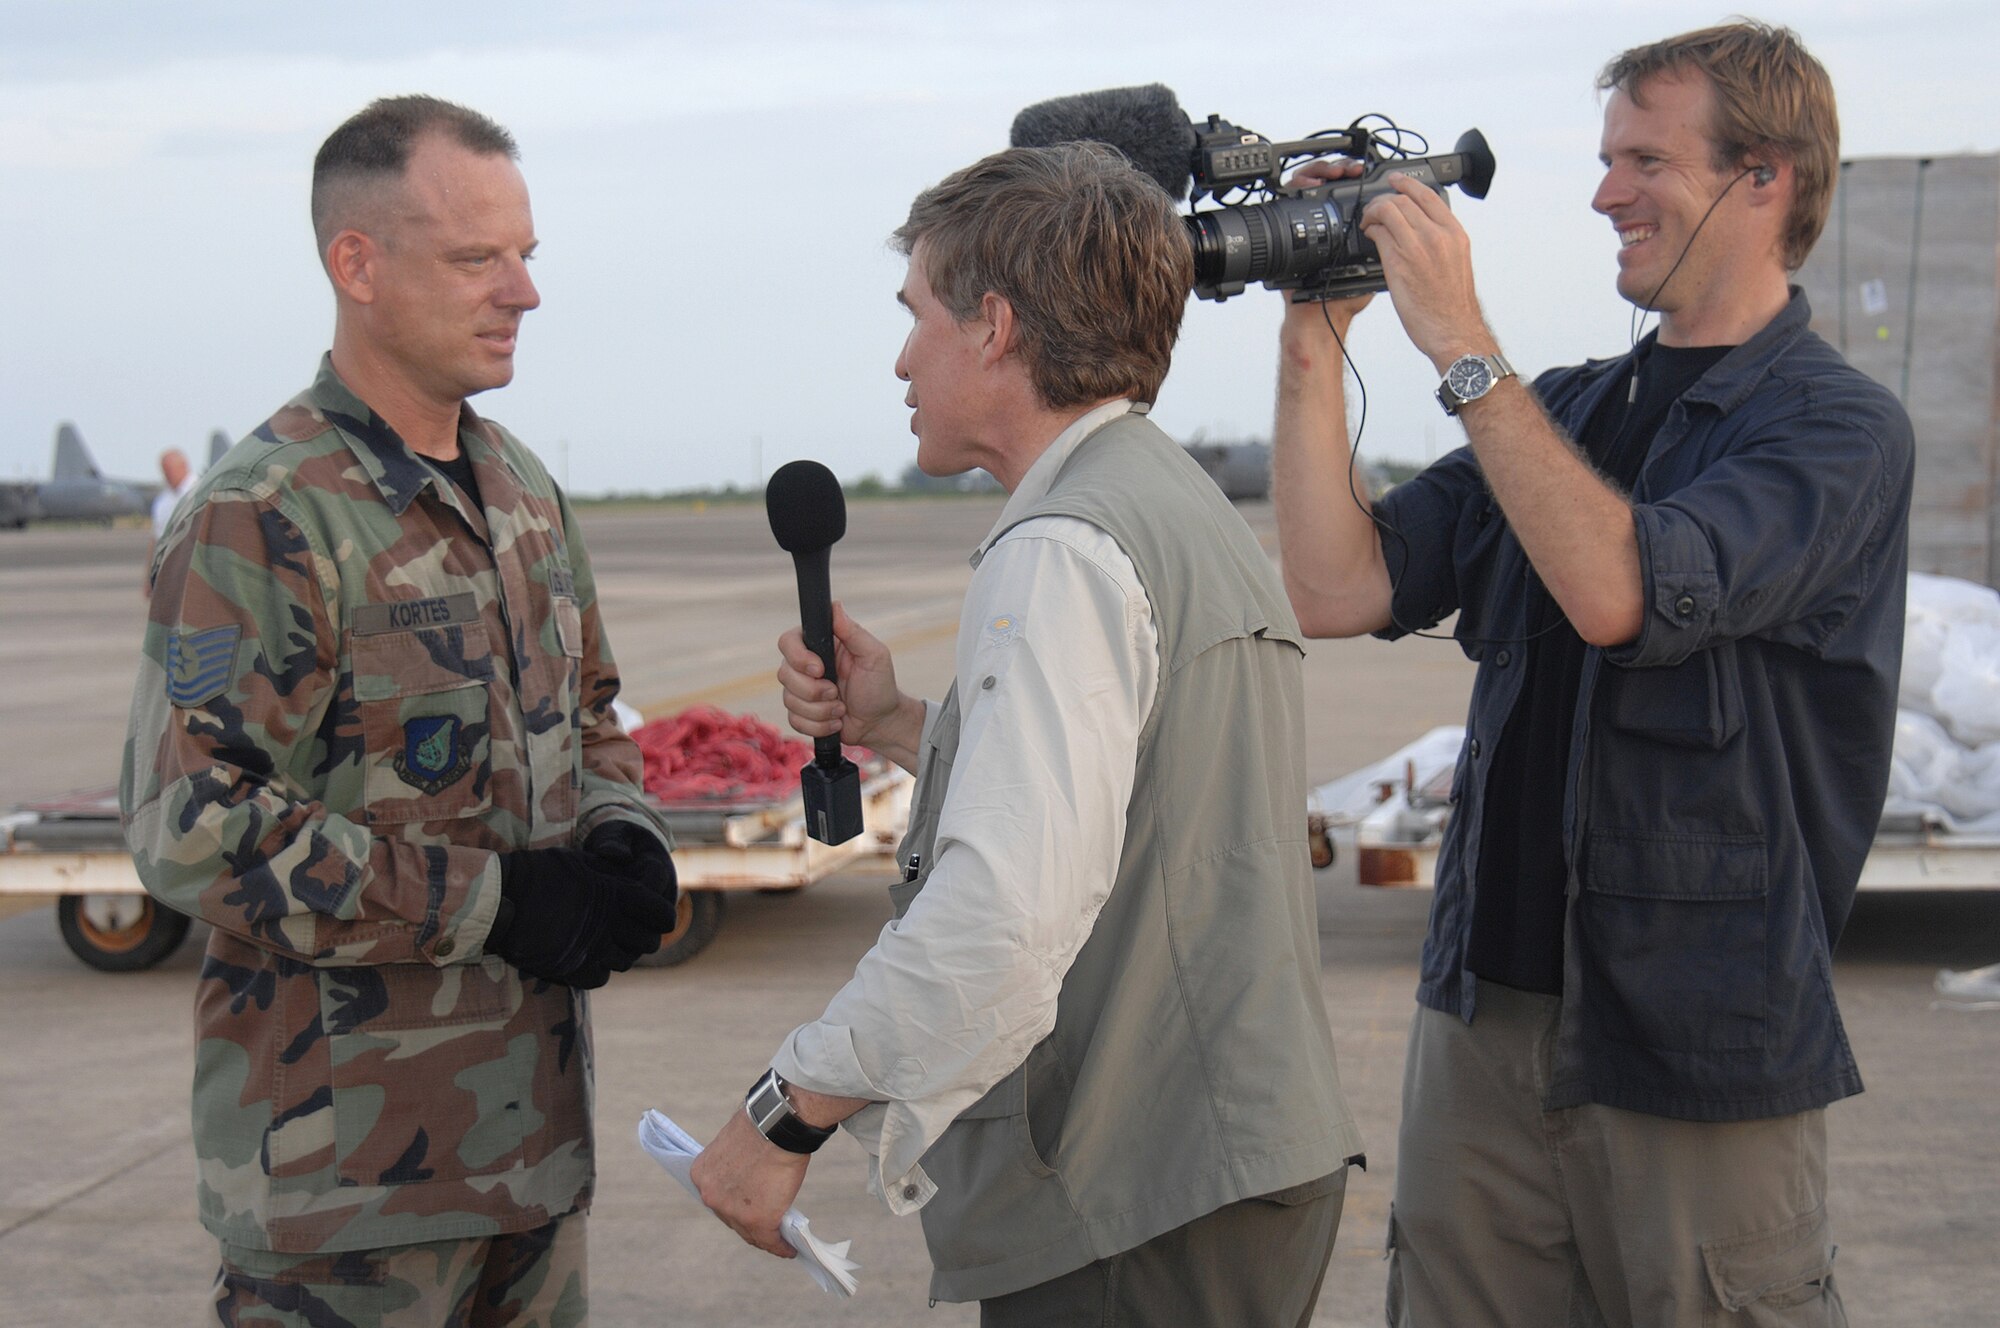 Utapao, Thailand - Technical Sgt John Kortez is interviewed by FOX News correspondents on the relief efforts being made by military personnel to the people of Burma May 16. (USAF photo/Senior Airman Sonya Croston)(RELEASED)